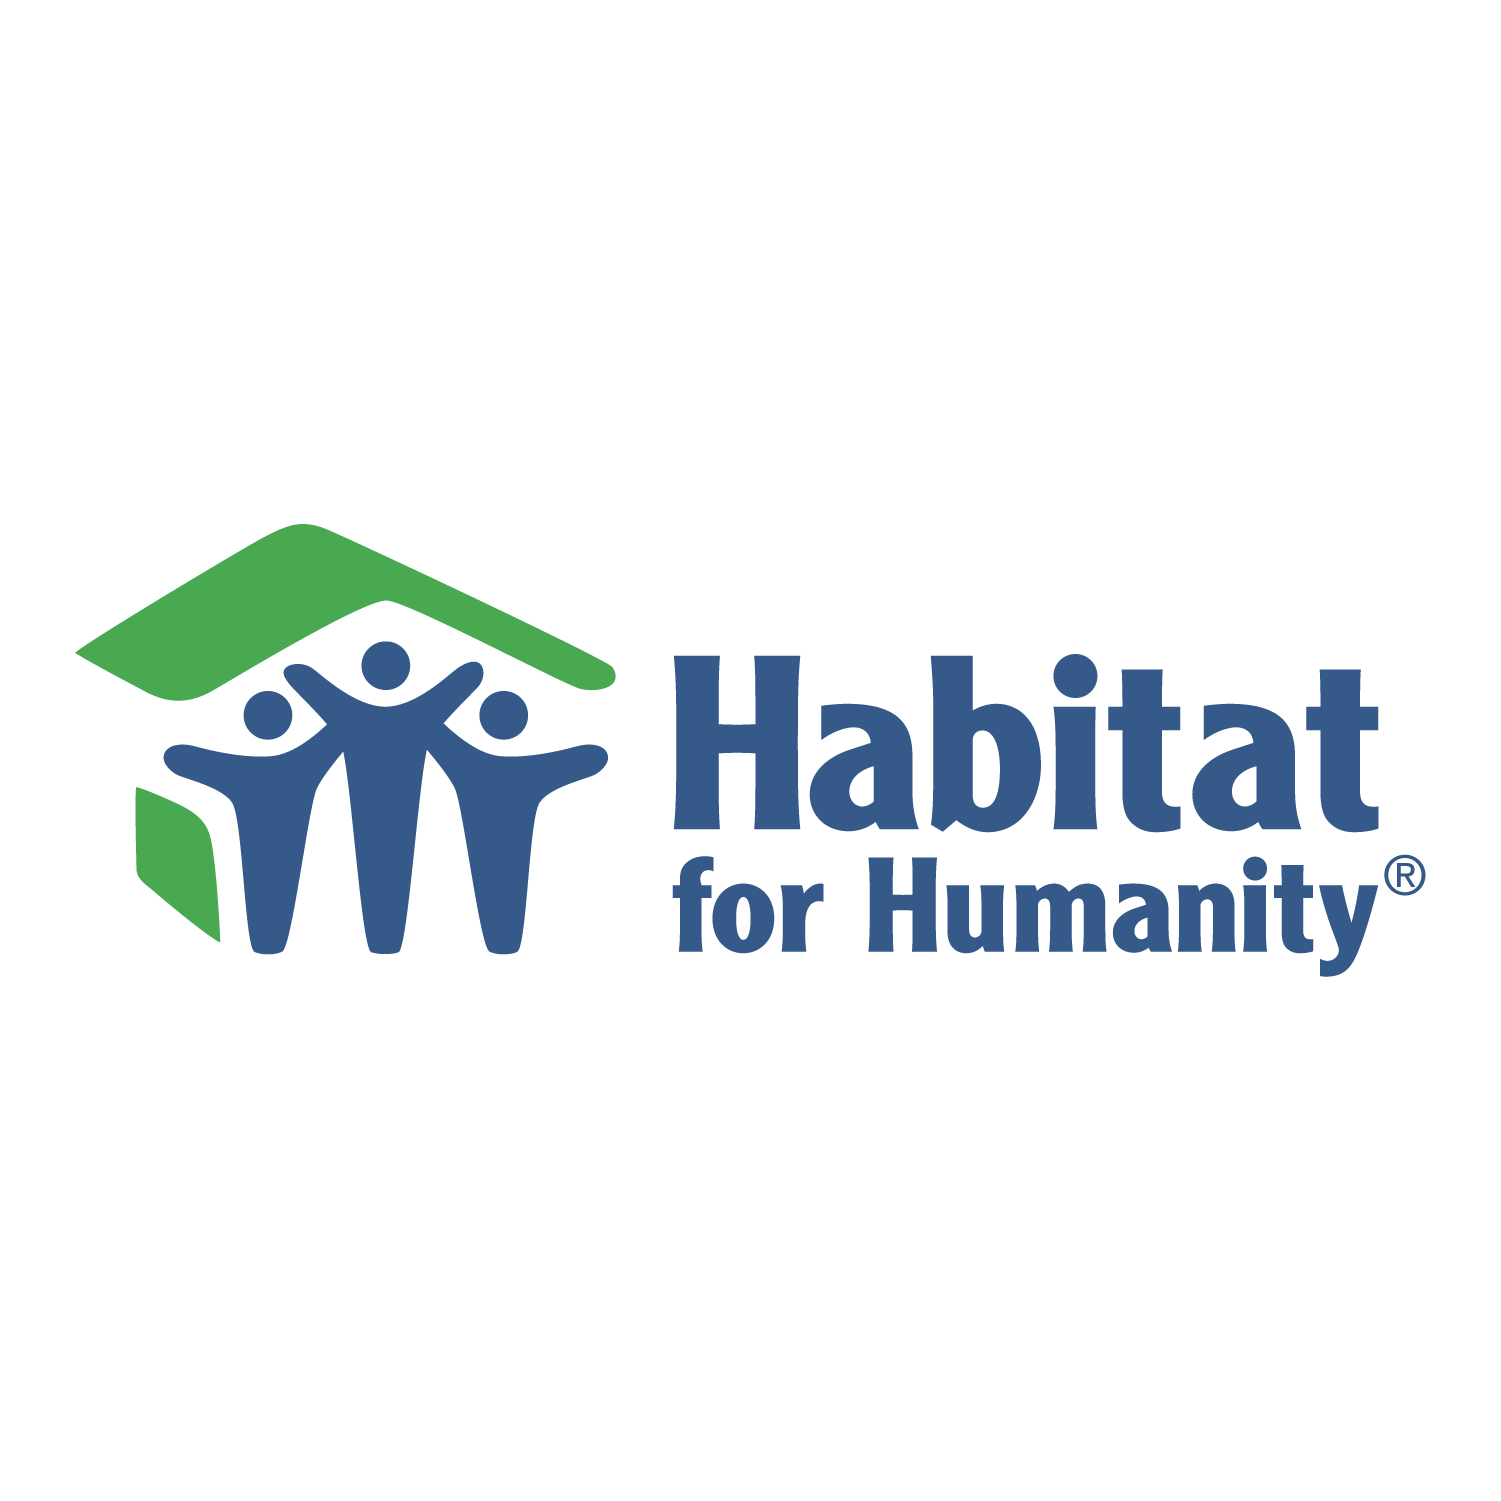 Habitat for Humanity.png